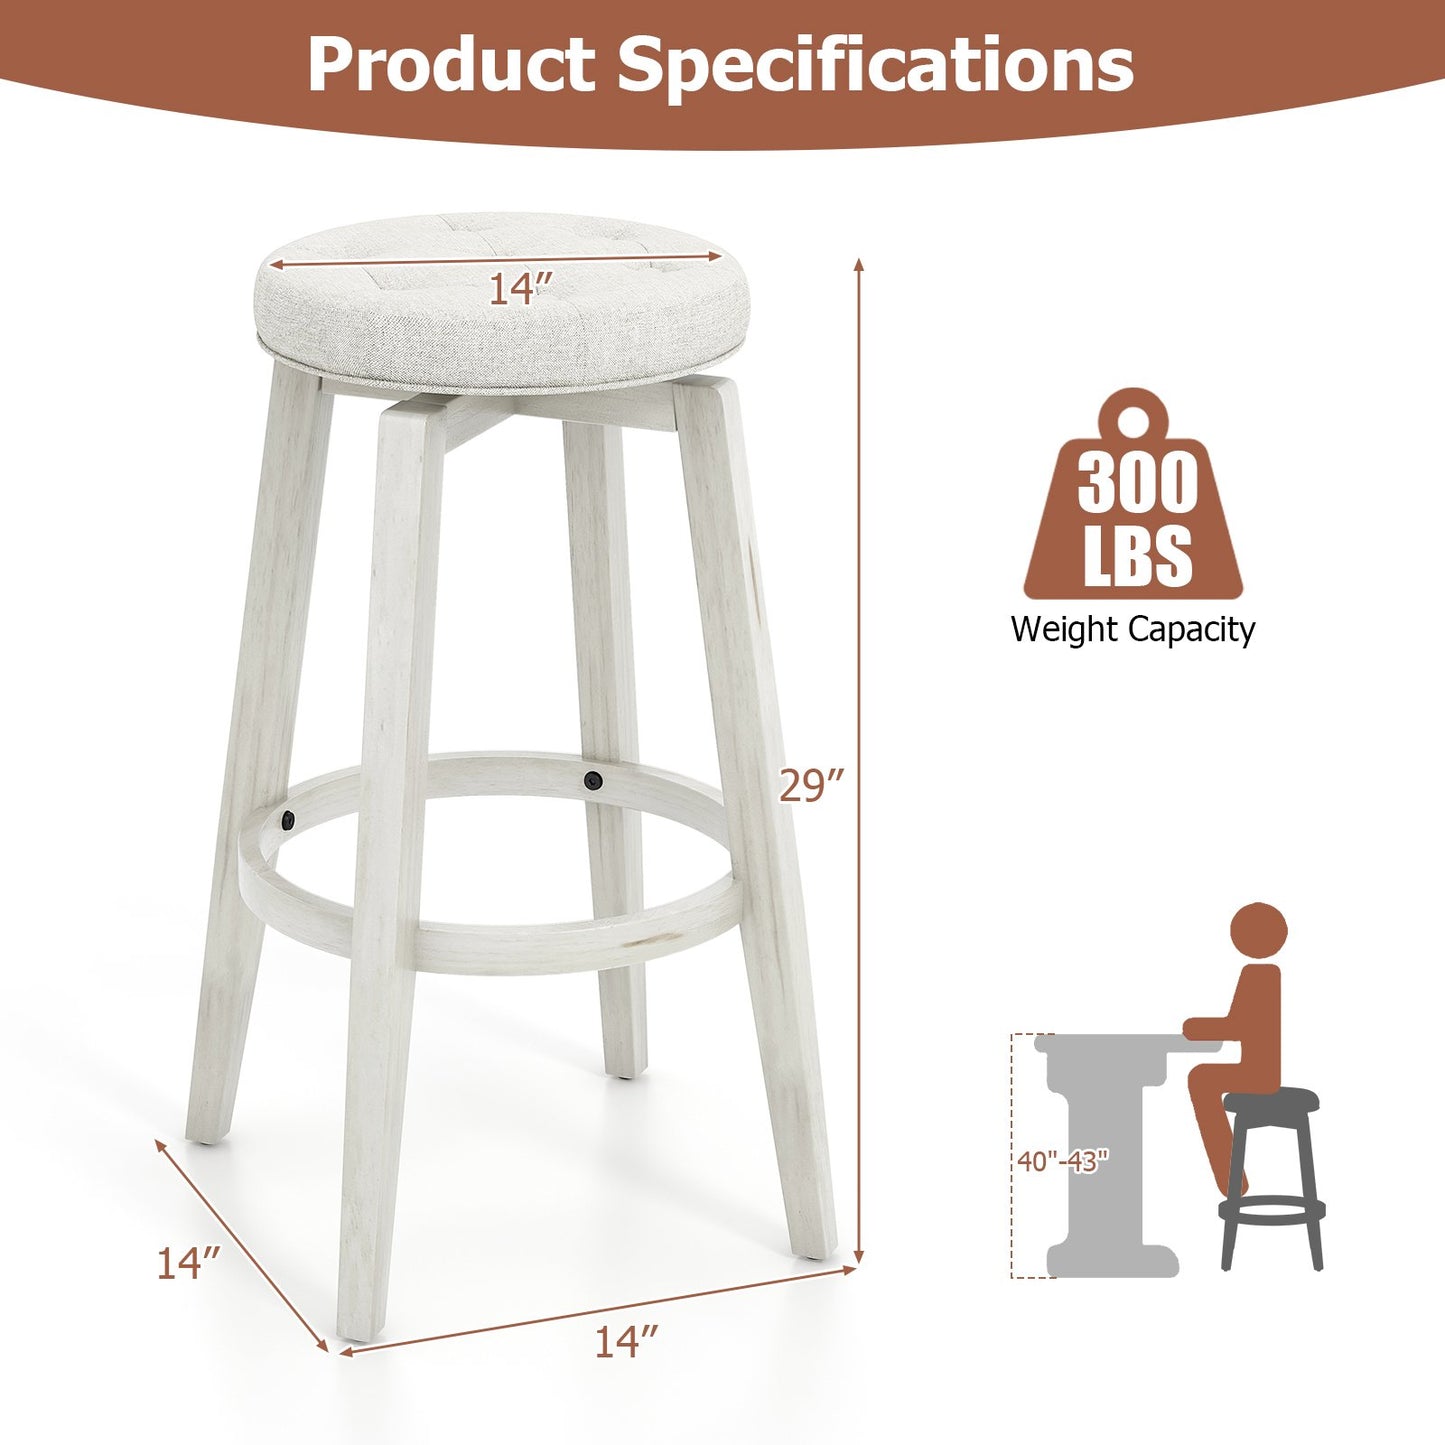 360° Swivel Upholstered Rubberwood Frame Bar Stool Set of 2 with Footrest-29 inches, White